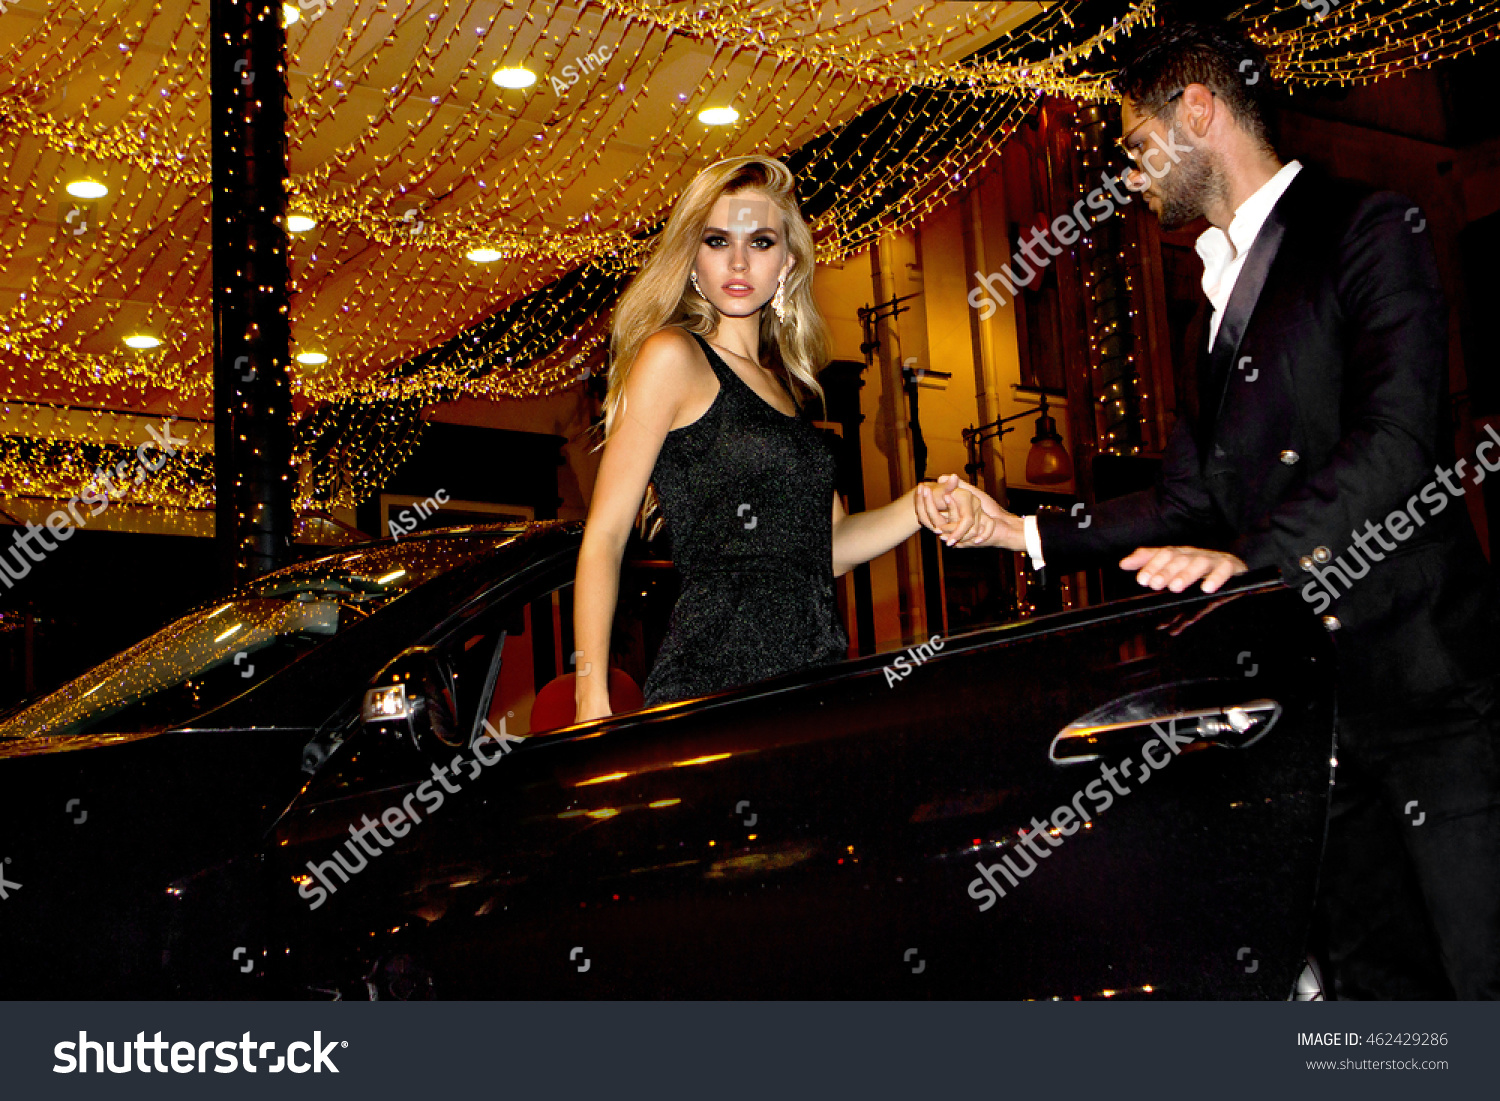 Meeting stars on the red carpet. Couple in luxury car. Night life. #462429286